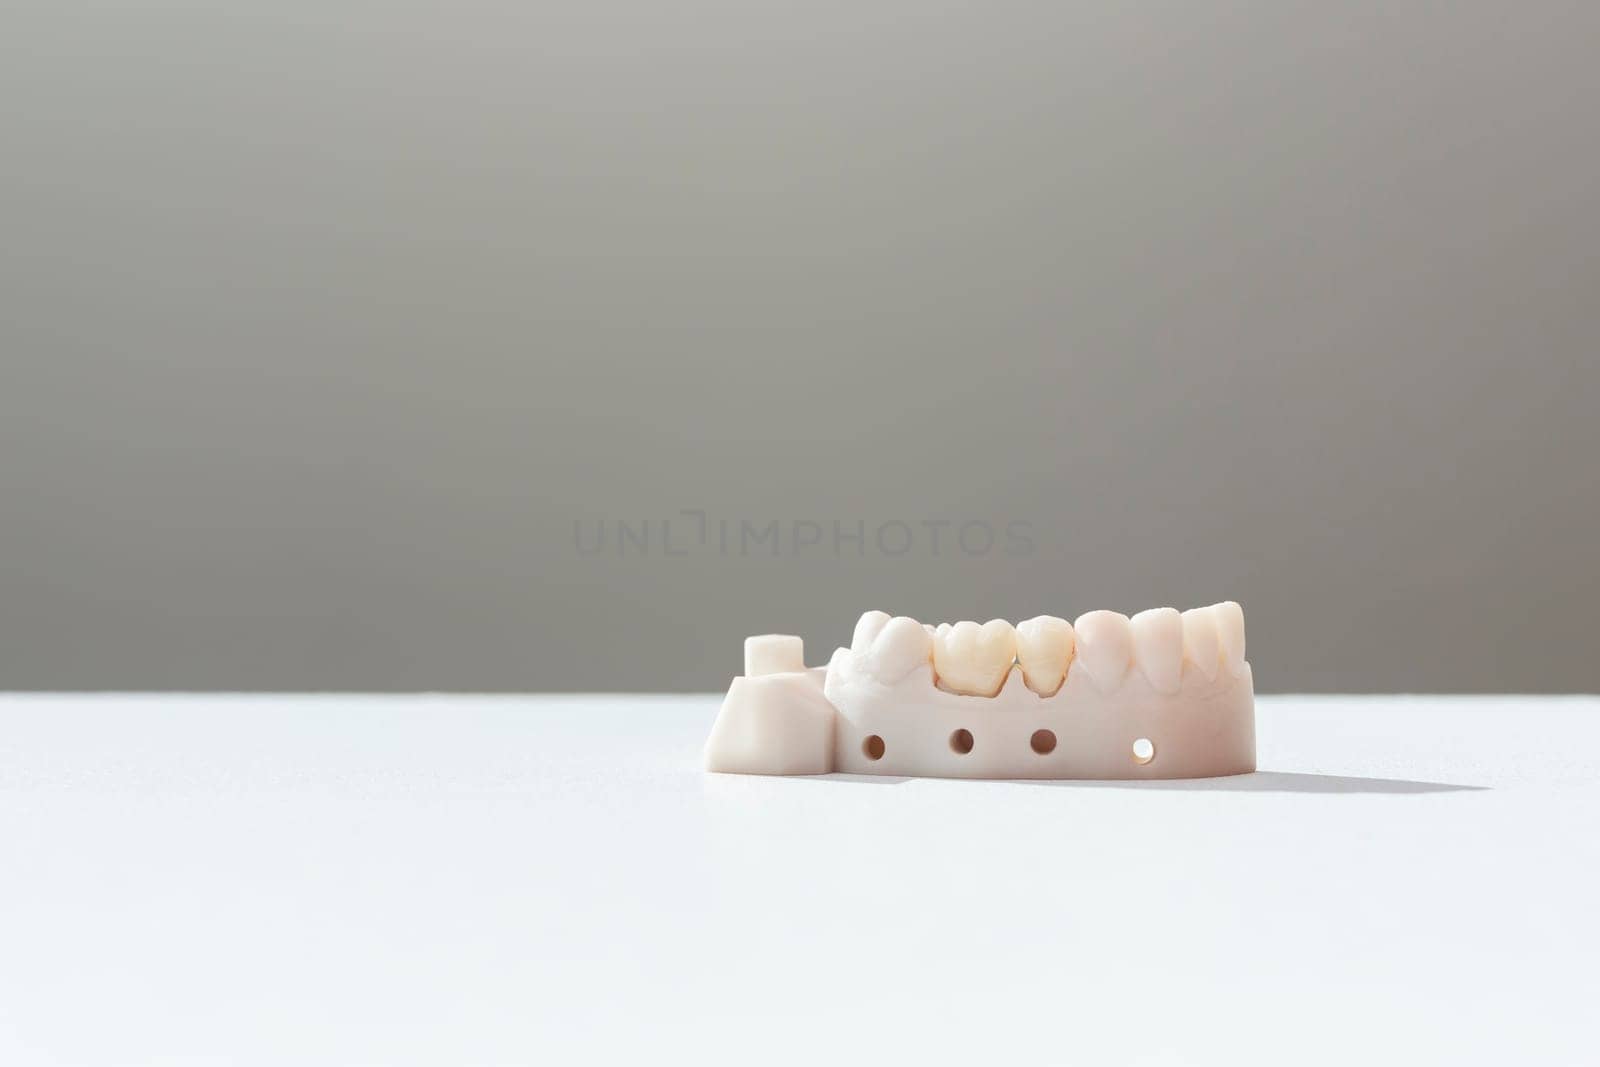 Teeth Crowns And Bridge Equipment Model Shows Fix Restoration, Prosthodontics Or Prosthetic. Inserting Or Placing Procedure Of Ceramic Dental Crown. Horizontal View, Space For Text. by netatsi